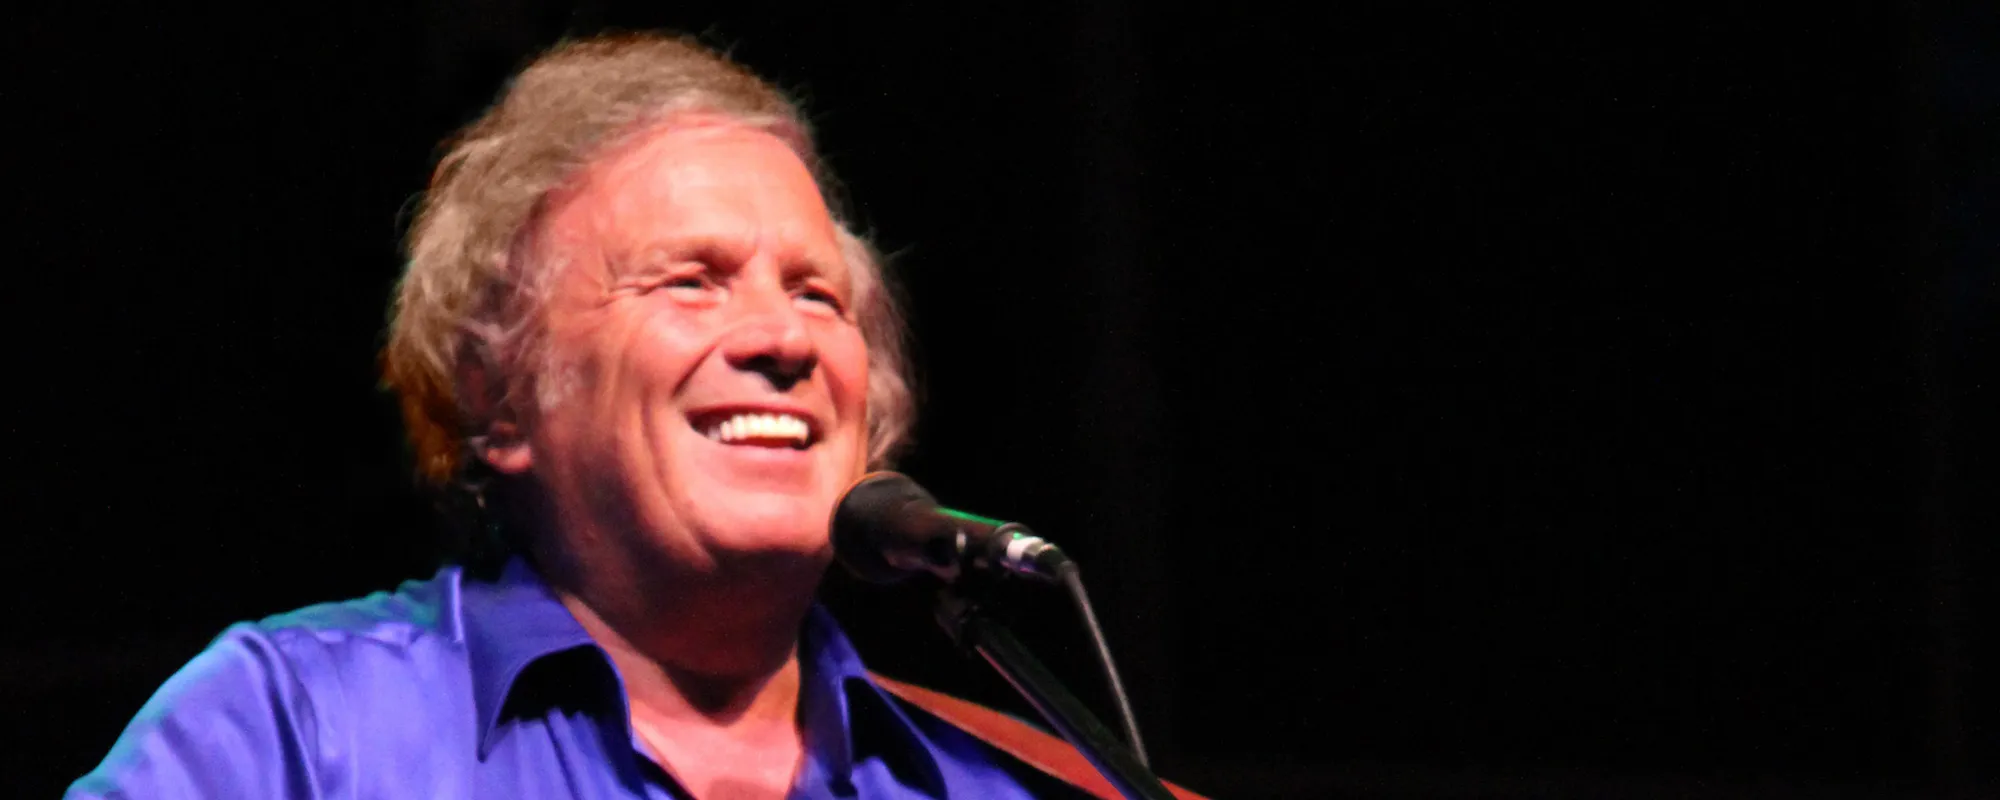 Don McLean Cancels NRA Performance Following Texas School Shooting